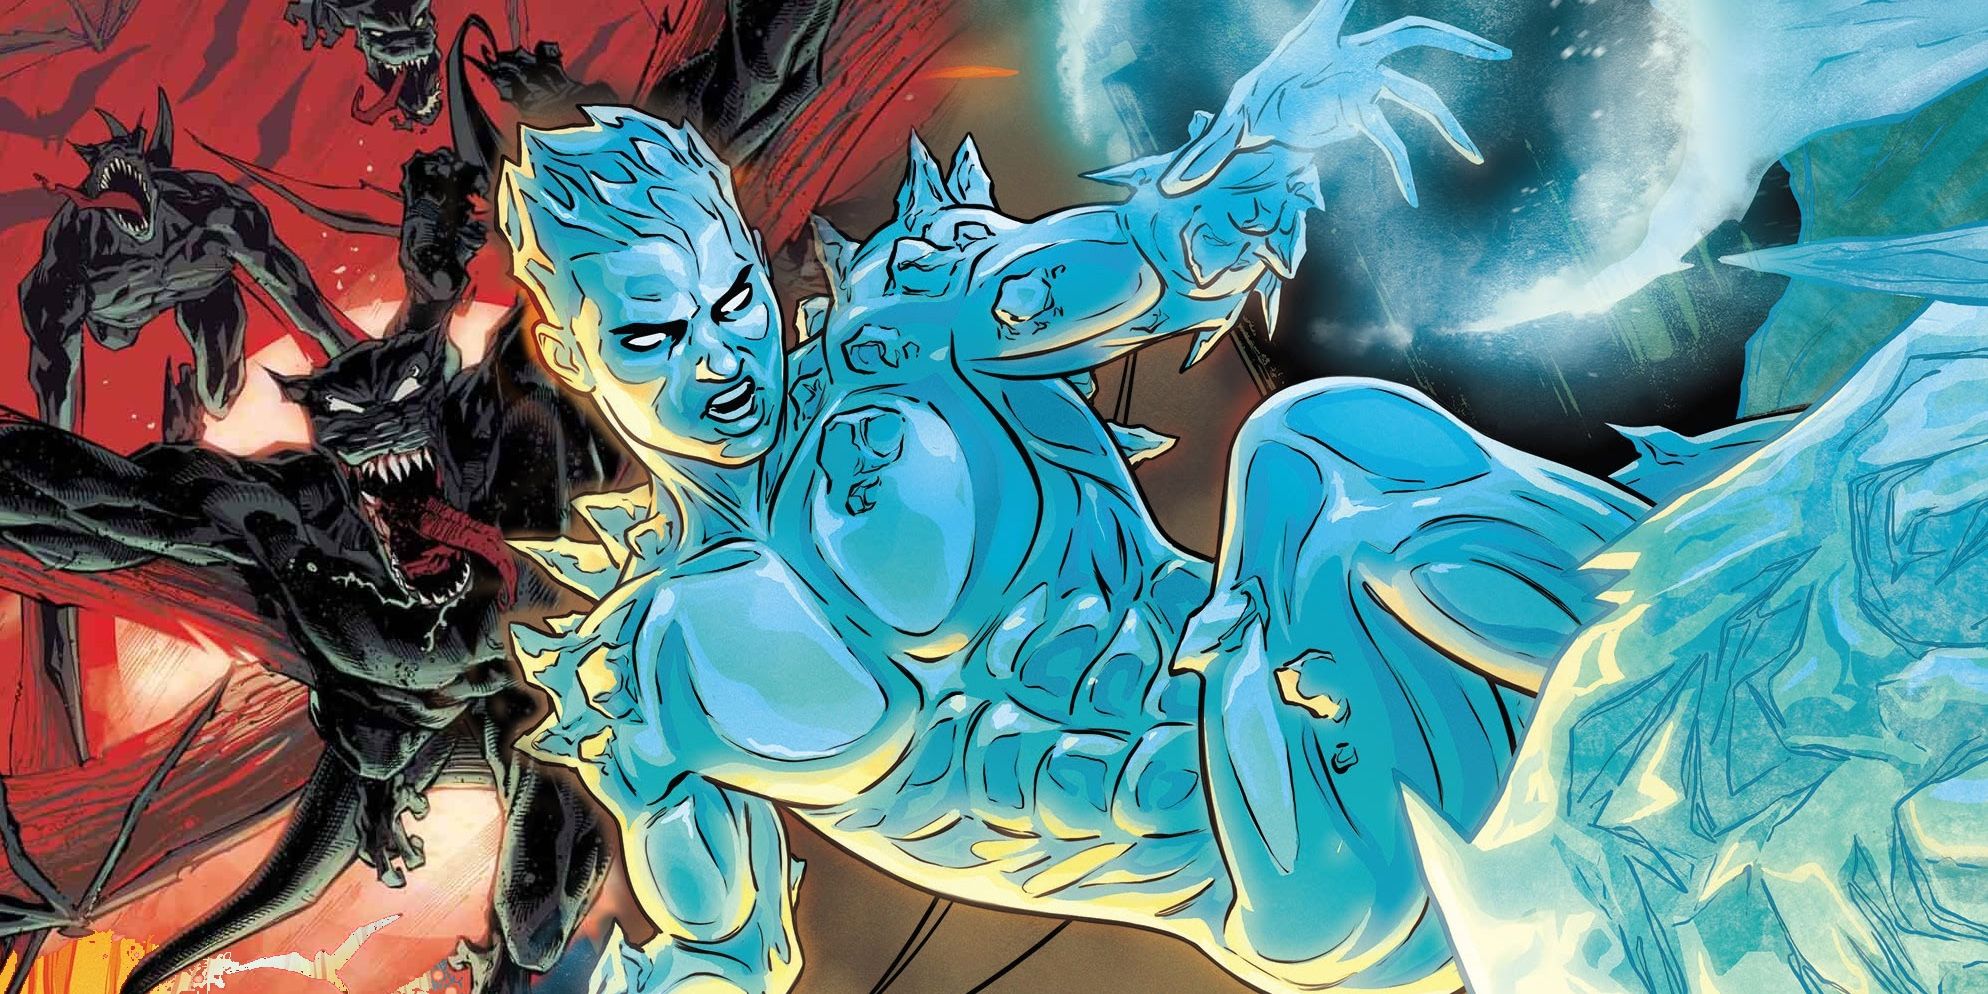 Iceman and the King in Black's dragon army